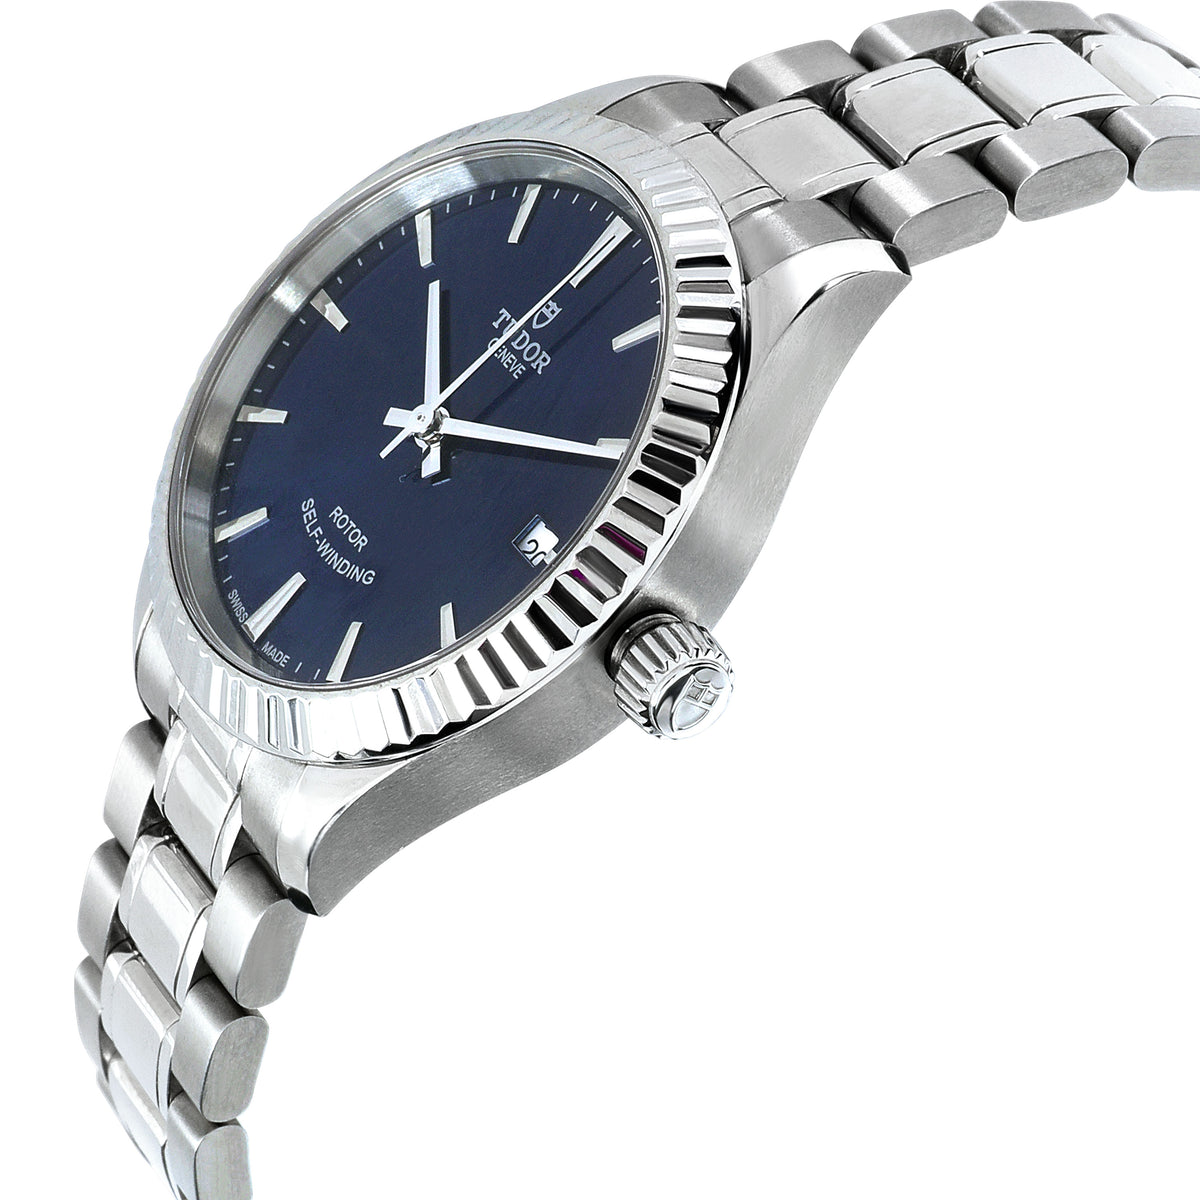 Tudor Style M12310-0013 Unisex Watch in  Stainless Steel